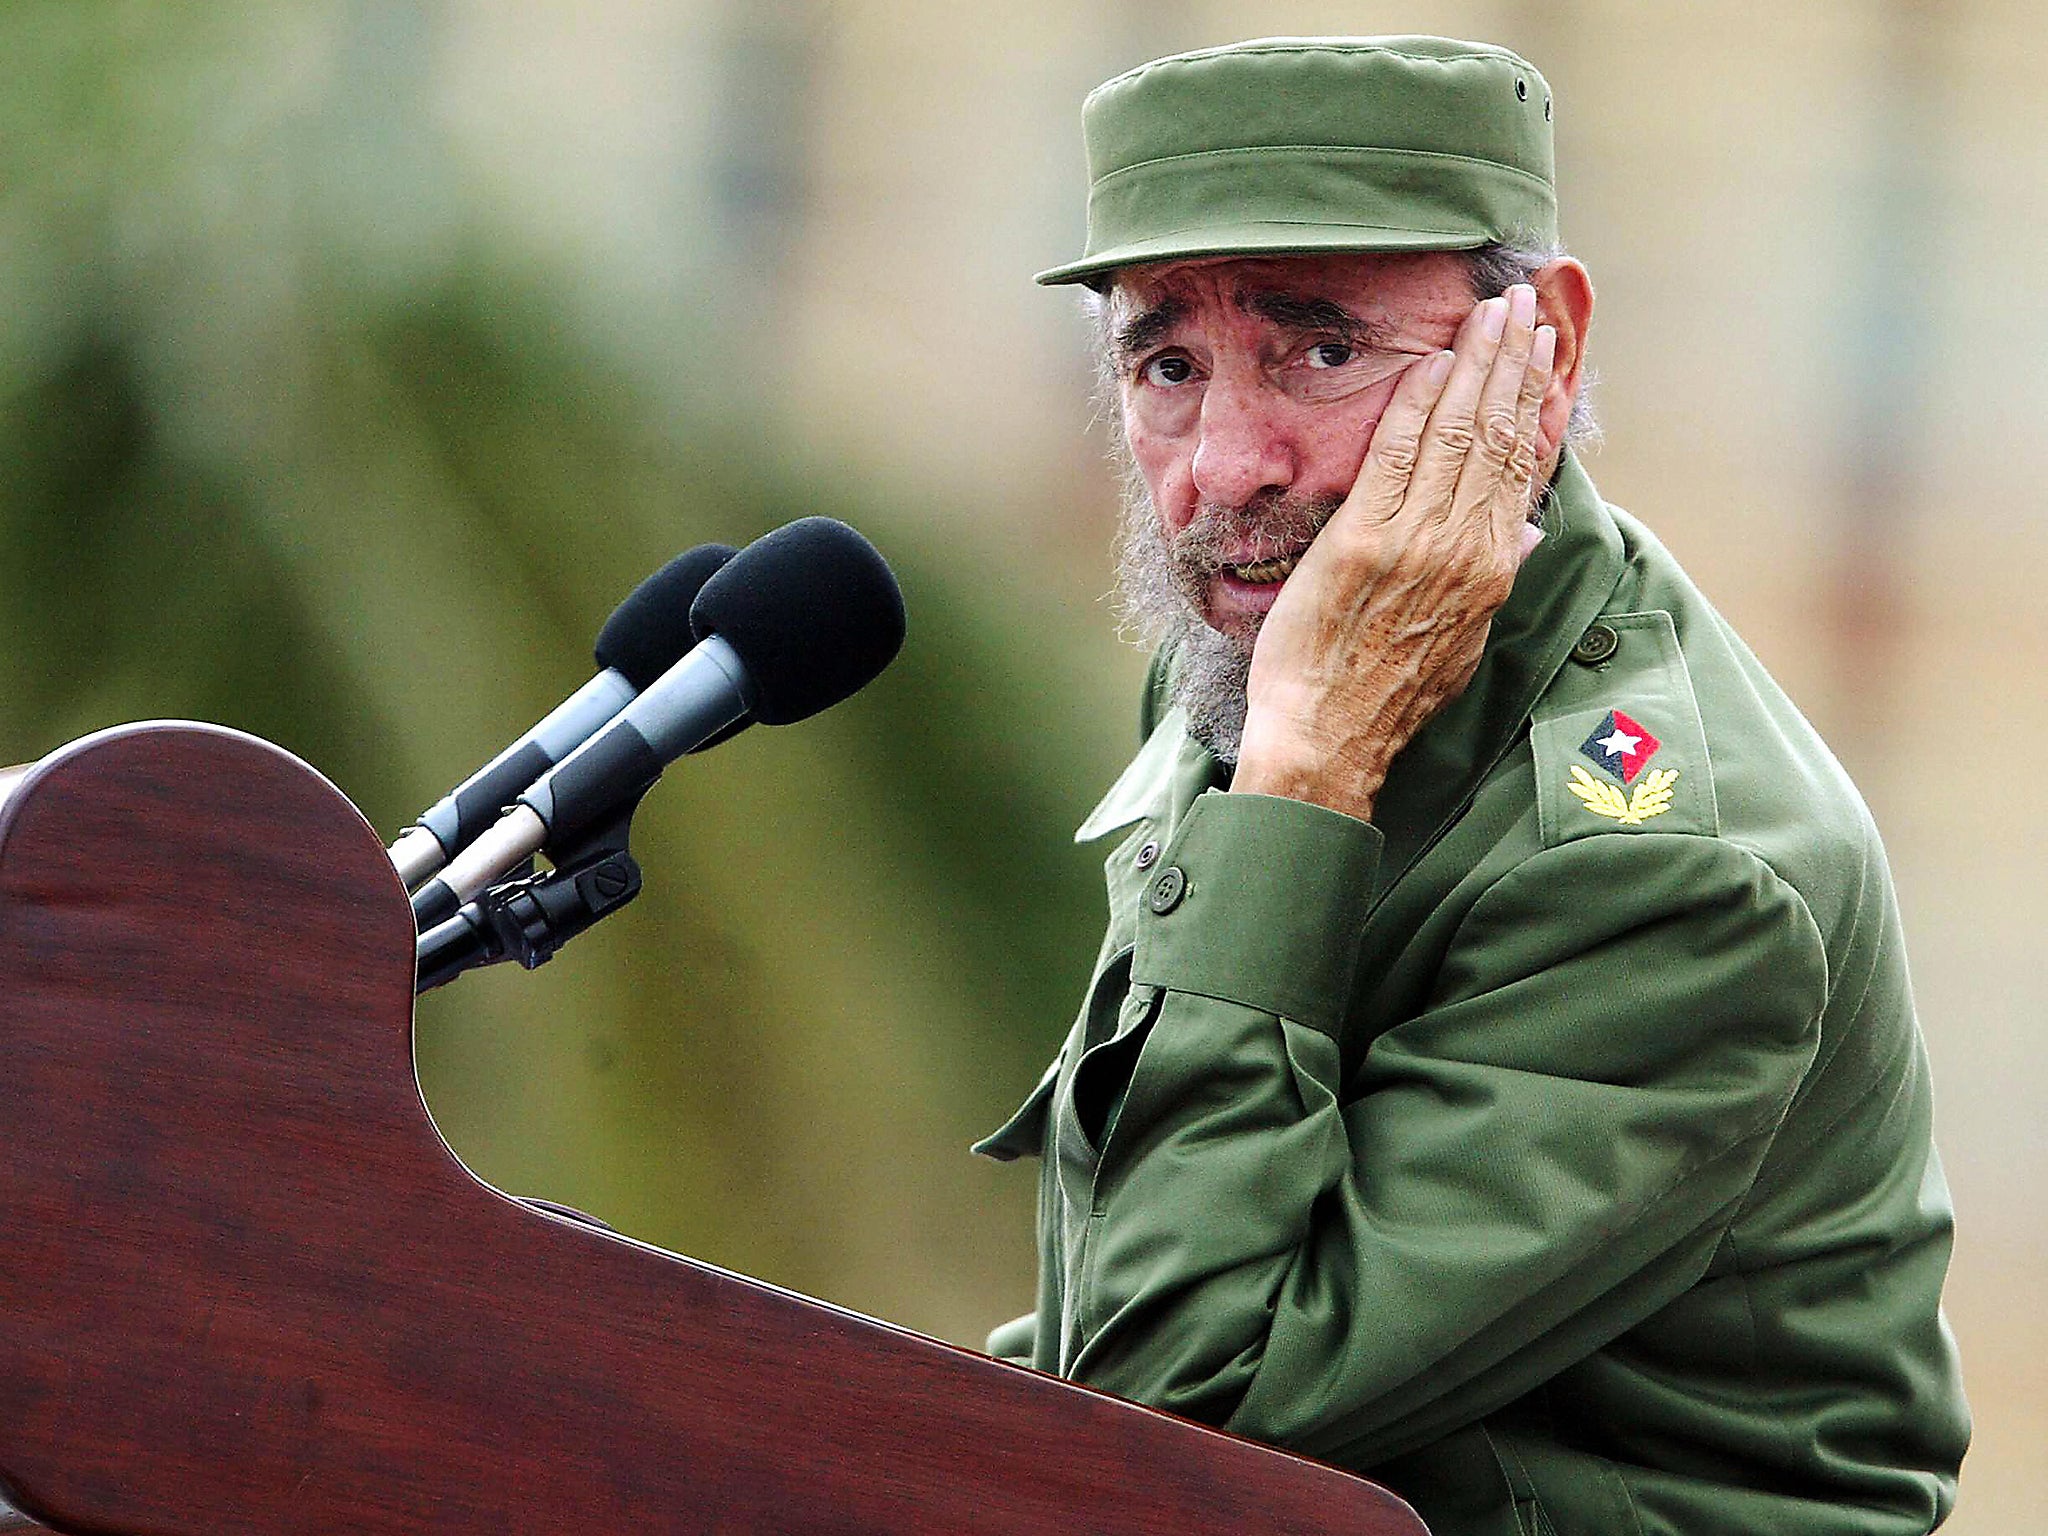 While Mr Obama met Raul Castro during his Havana visit in March, he was snubbed by Fidel